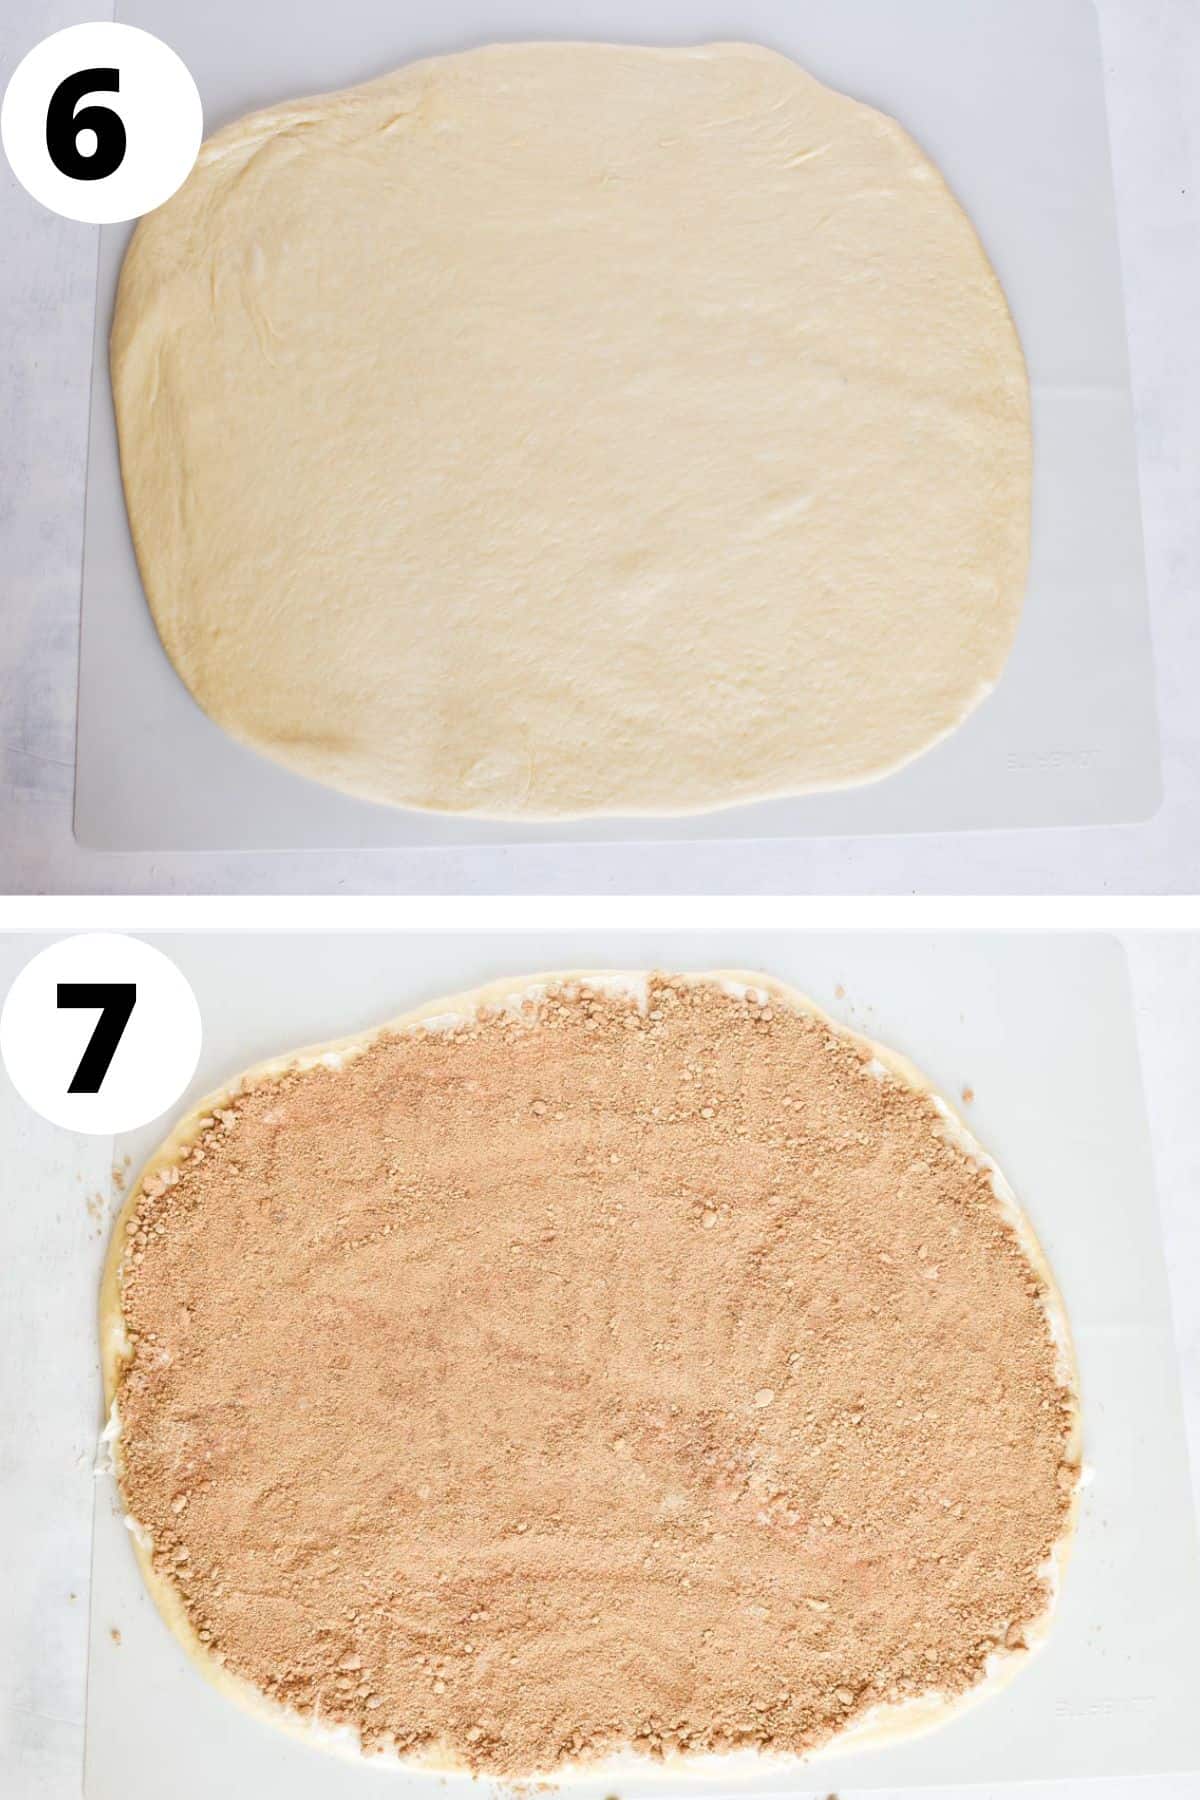 two images showing dough rolled out and the second images shoes dough with butter and cinnamon sugar over top. 